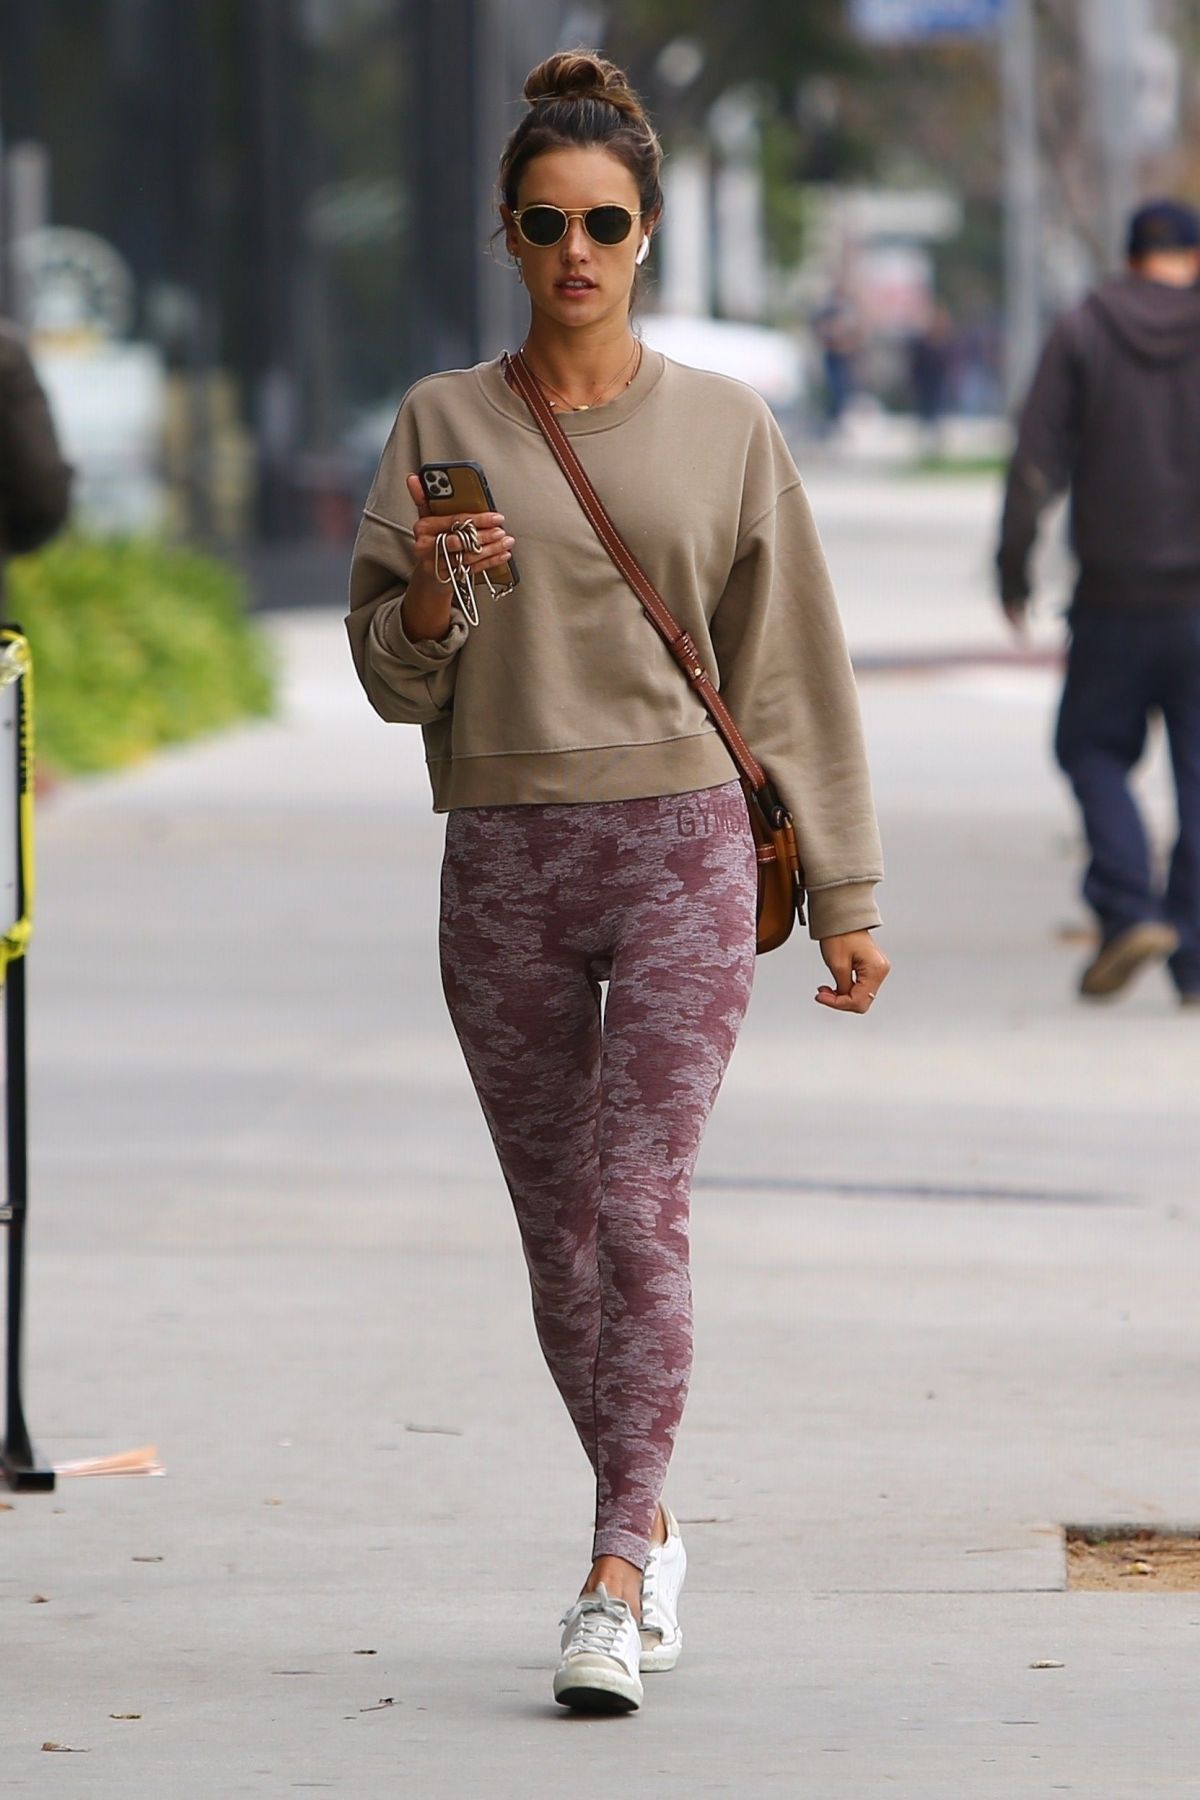 ALESSANDRA AMBROSIO Heading to a Gym in Los Angeles 01/26/2020 – HawtCelebs